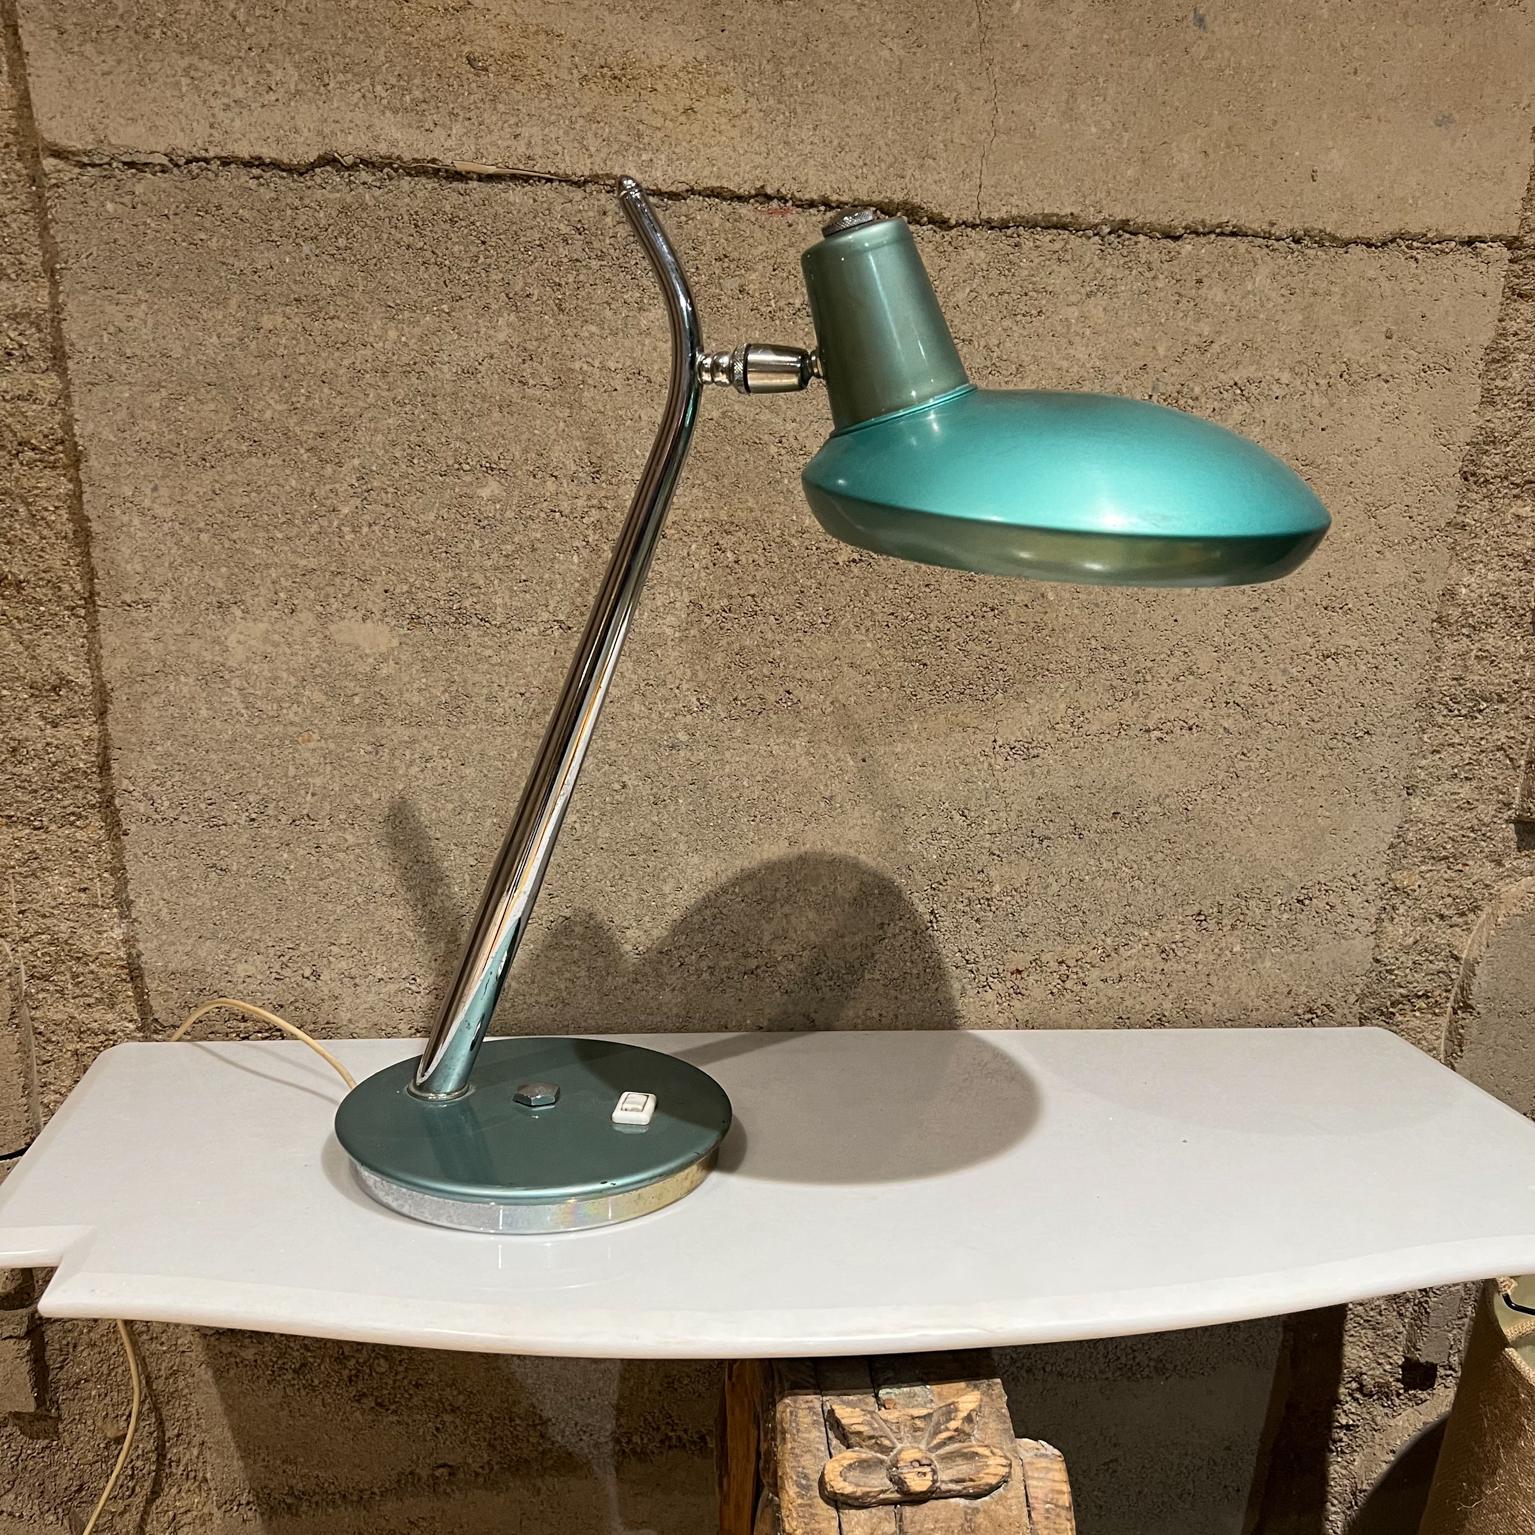 1960s Green Desk Lamp Space Age Boomerang Style of Luis Pérez de la Oliva for Fase, Madrid, Spain
Unmarked
18 tall x 8.75 w x 18
Preowned original unrestored vintage condition.
Button at base for on and off.
Refer to images provided

